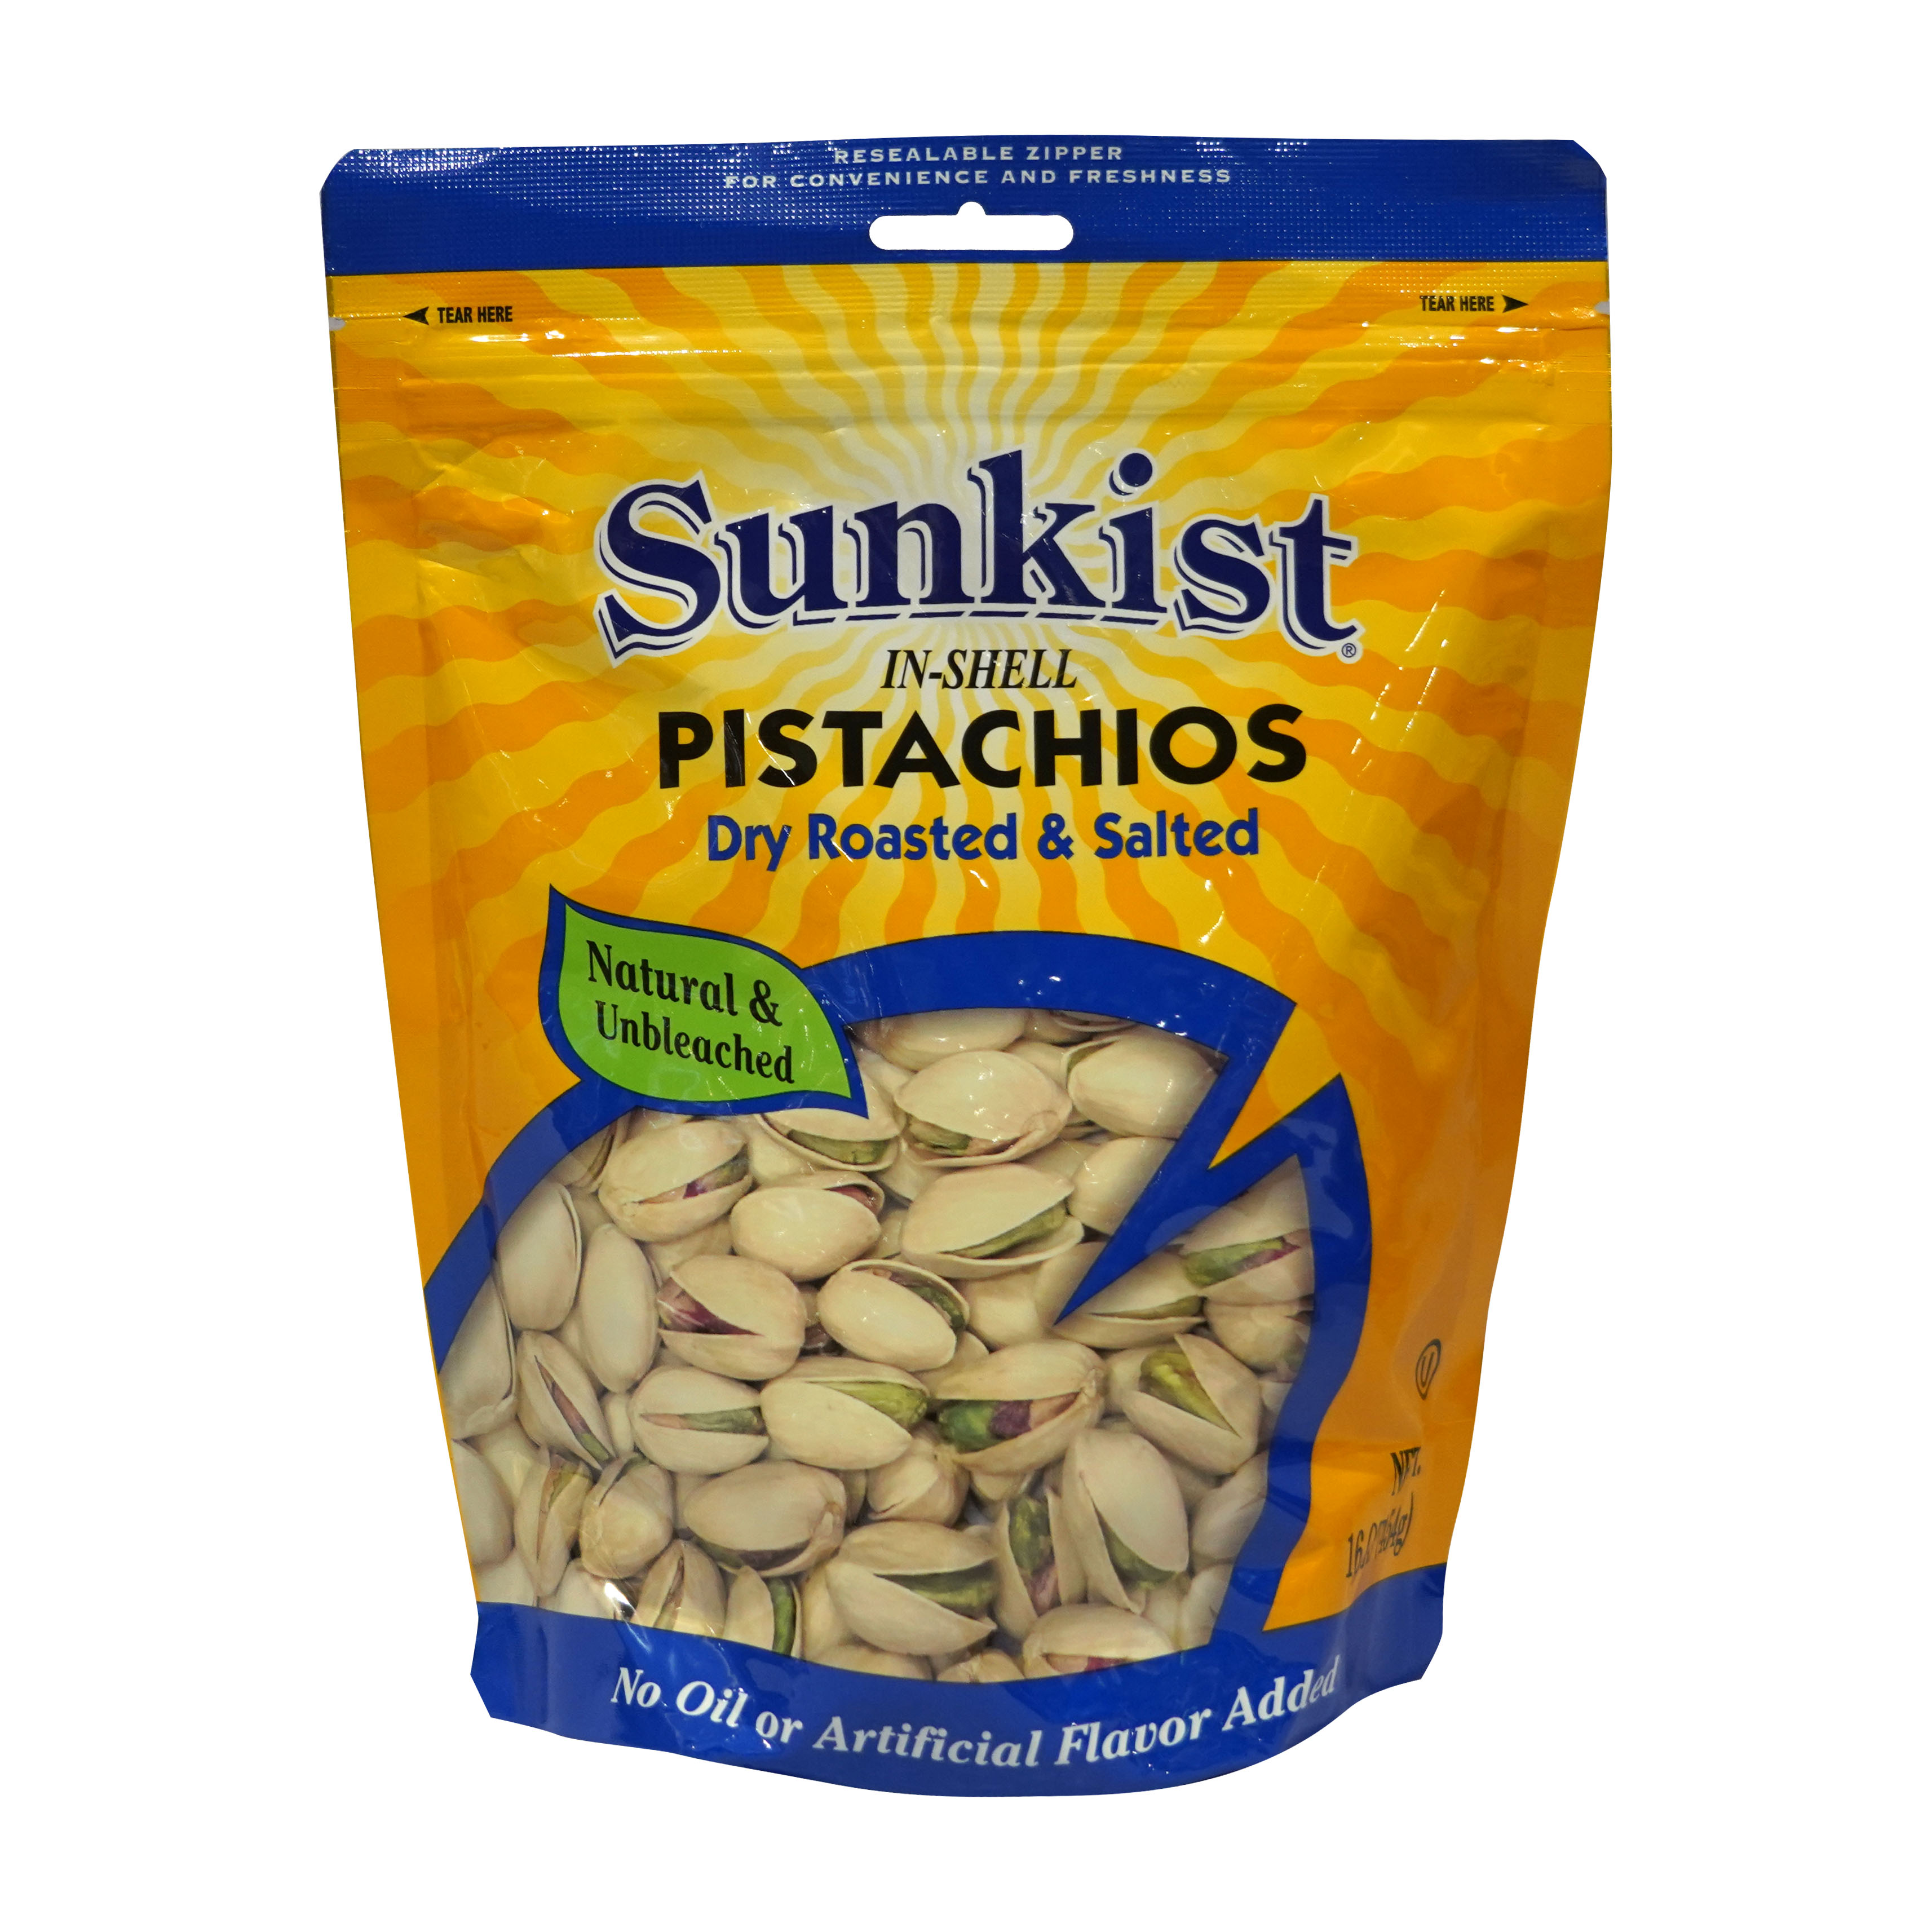 Sunkist Dry Roasted and Salted Pistachios (454g)